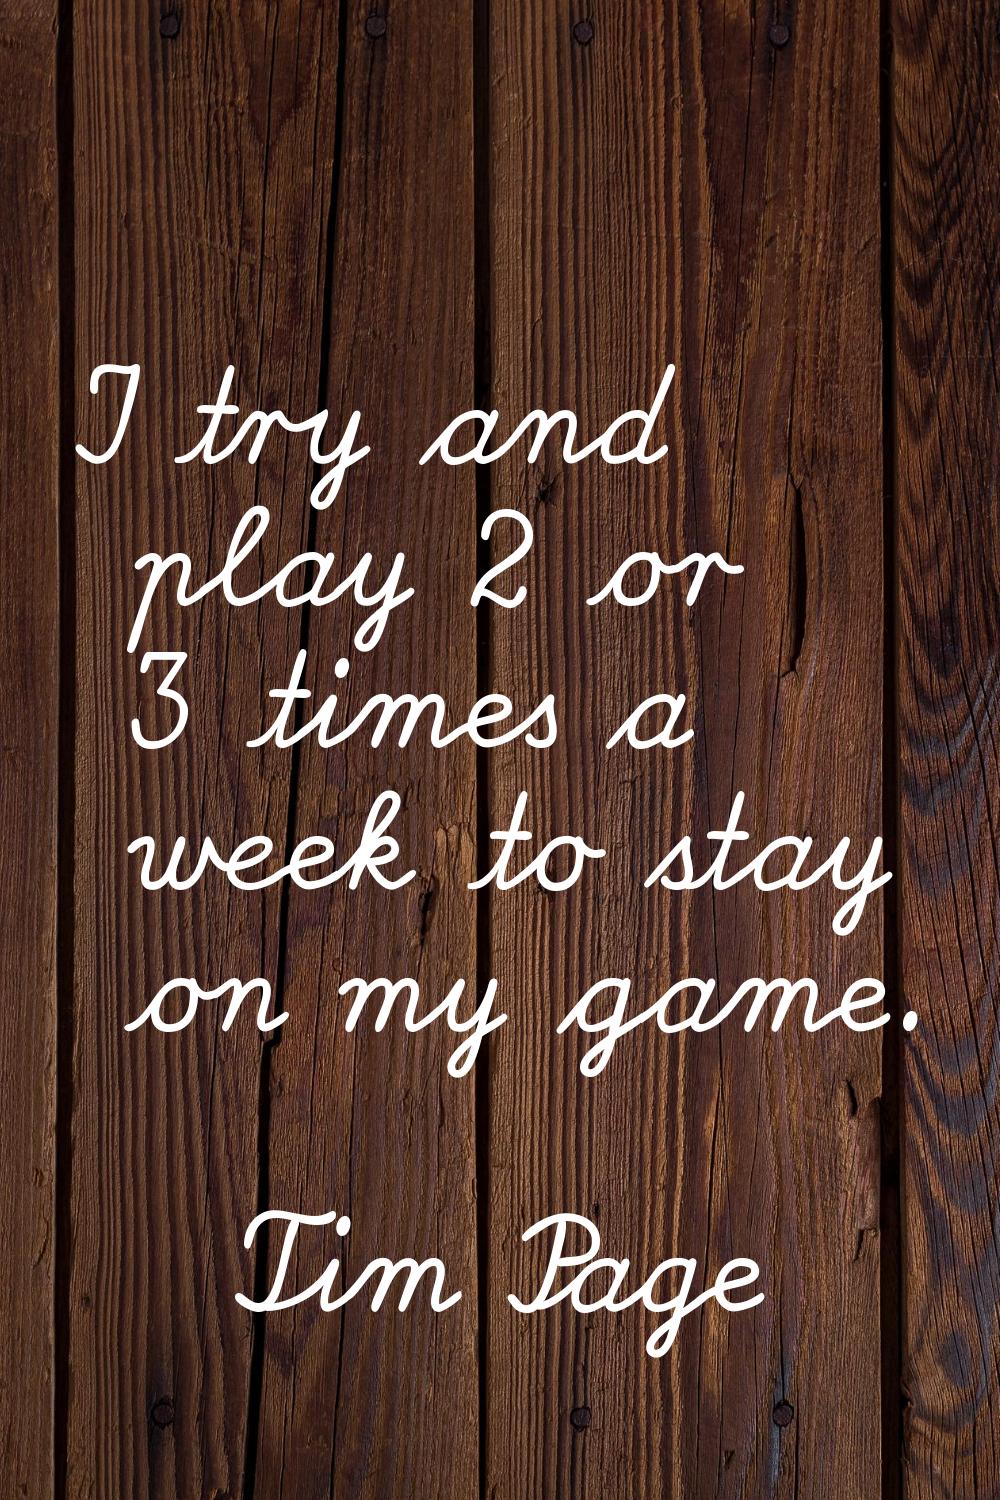 I try and play 2 or 3 times a week to stay on my game.